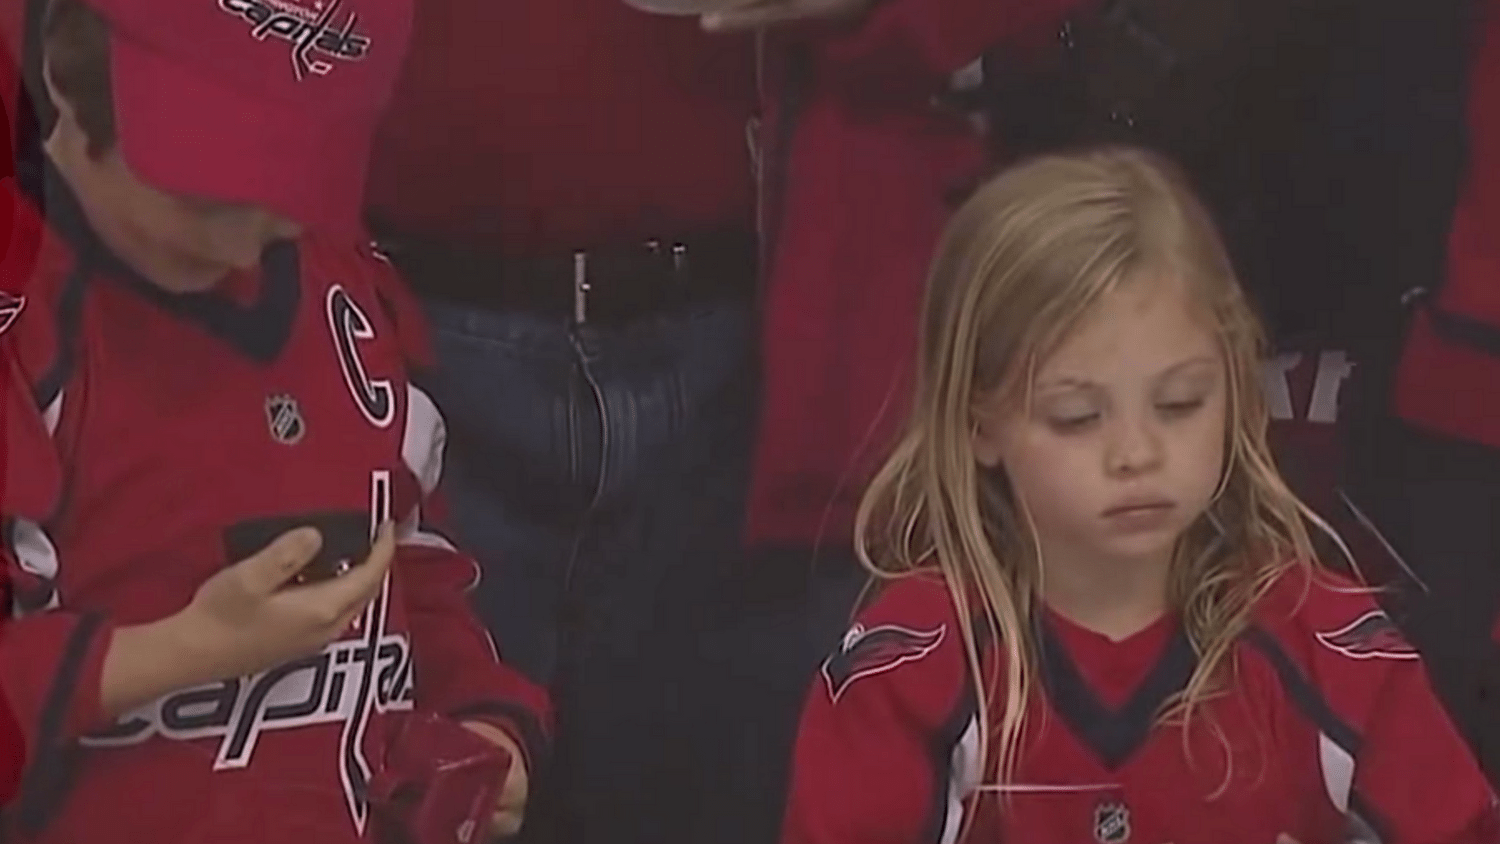 This Hilarious Video Shows An NHL Player Making Sure A Little Girl Gets The Puck He Meant For Her